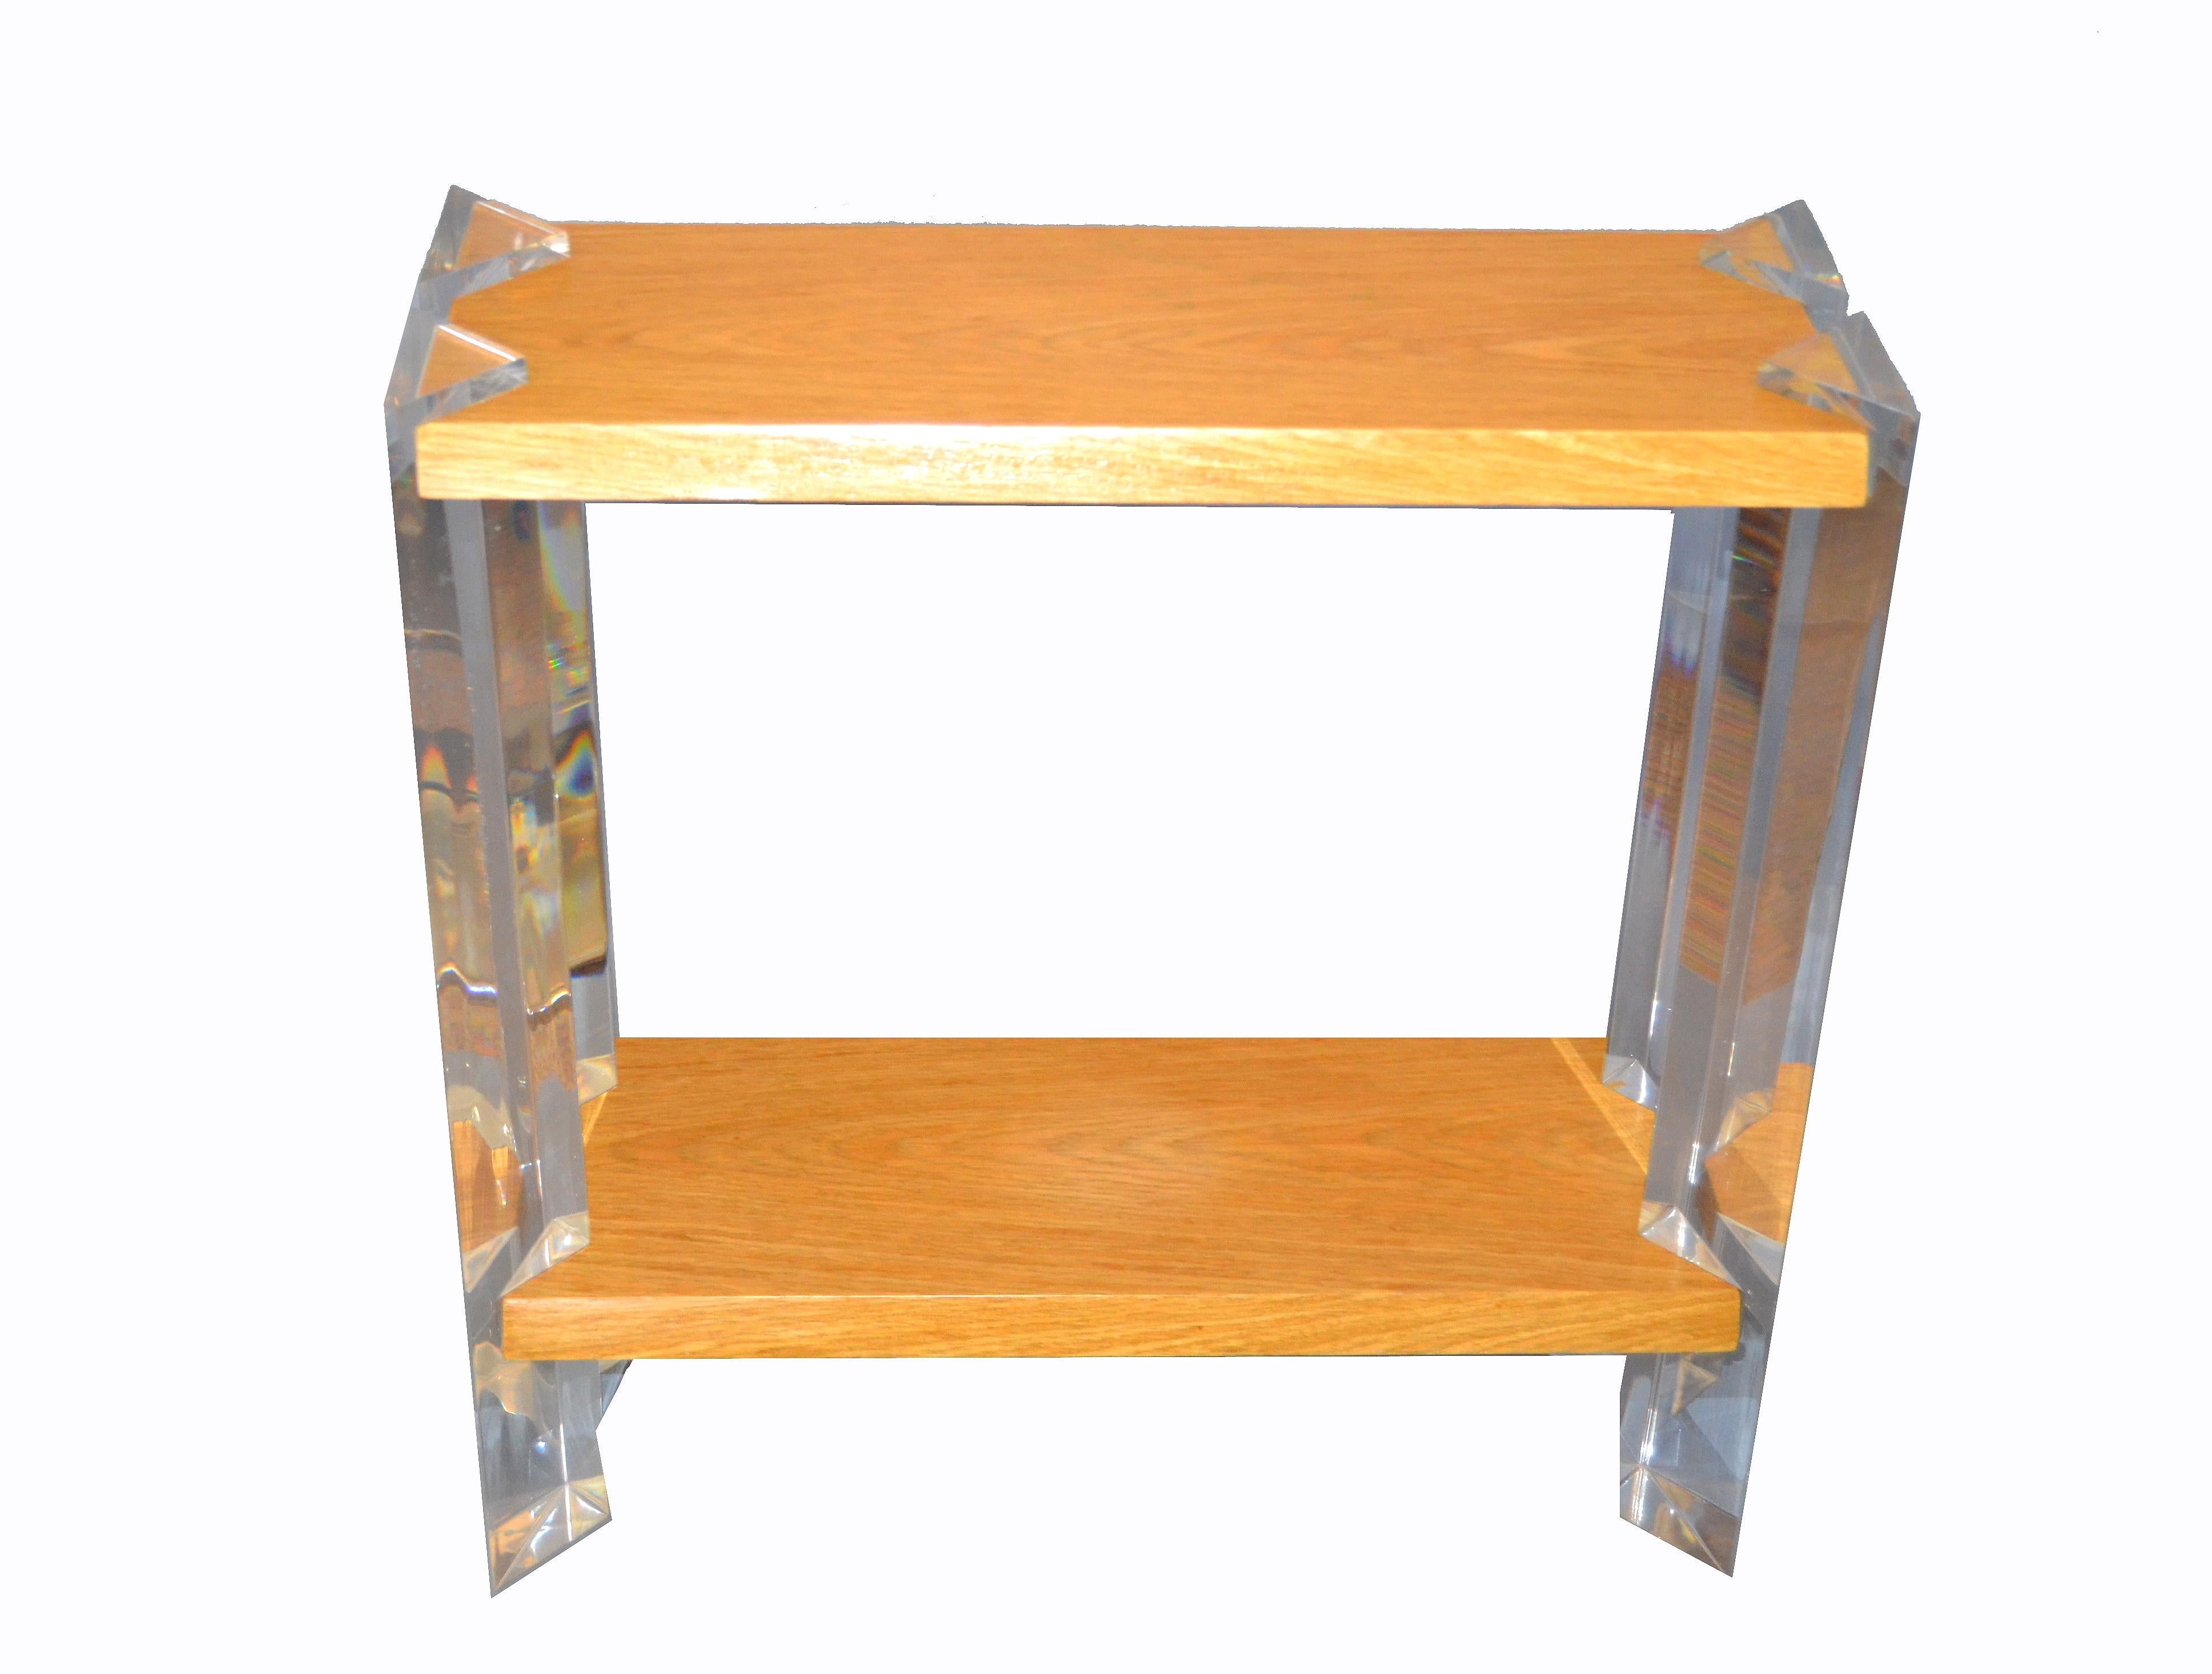 Italian Mid-Century Modern oak and acrylic two-tier console table or bookshelf.
It was made in Italy, circa 1960-1970.
This console is stylish as well as practical.